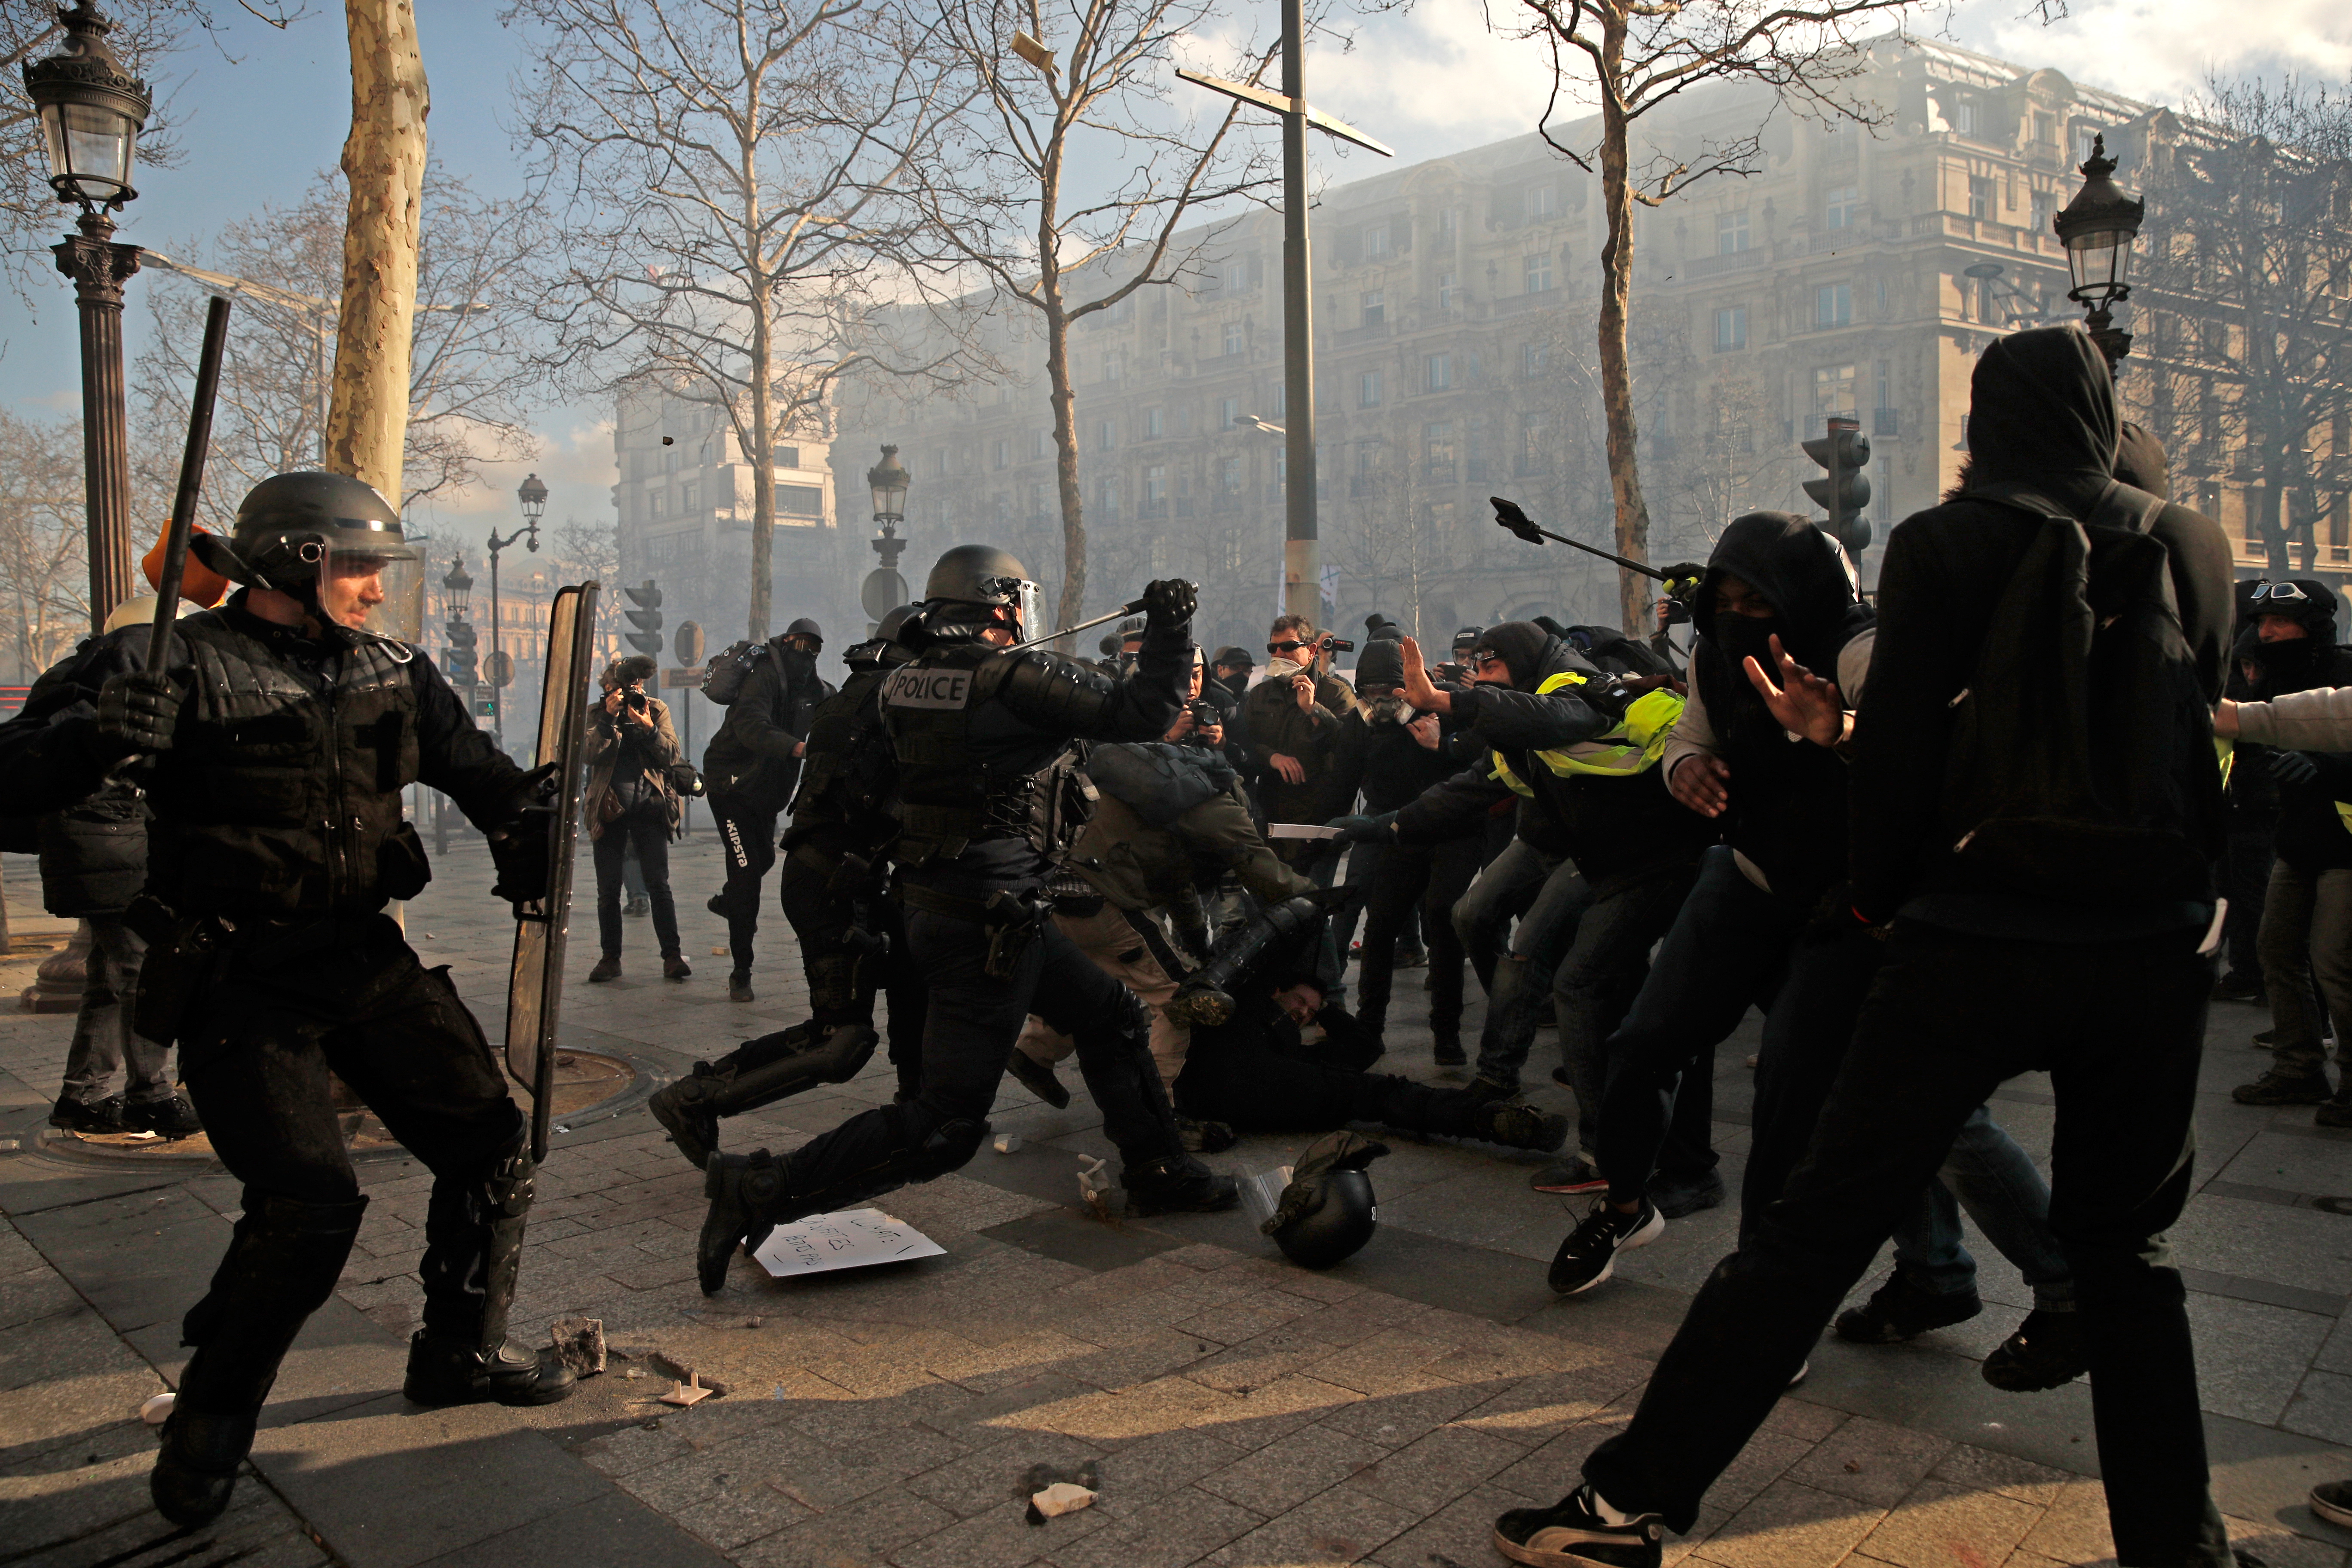 epa07443444 Yellow Vests protesters hit a riot police officer (C down) on the Champs Elysees during the 'Act XVIII' demonstration (the 18th consecutive national protest on a Saturday) in Paris, France, 16 March 2019. The so-called 'gilets jaunes' (yellow vests) is a grassroots protest movement with supporters from a wide span of the political spectrum, that originally started with protest across the nation in late 2018 against high fuel prices. The movement in the meantime also protests the French government's tax reforms, the increasing costs of living and some even call for the resignation of French President Emmanuel Macron.  EPA/YOAN VALAT